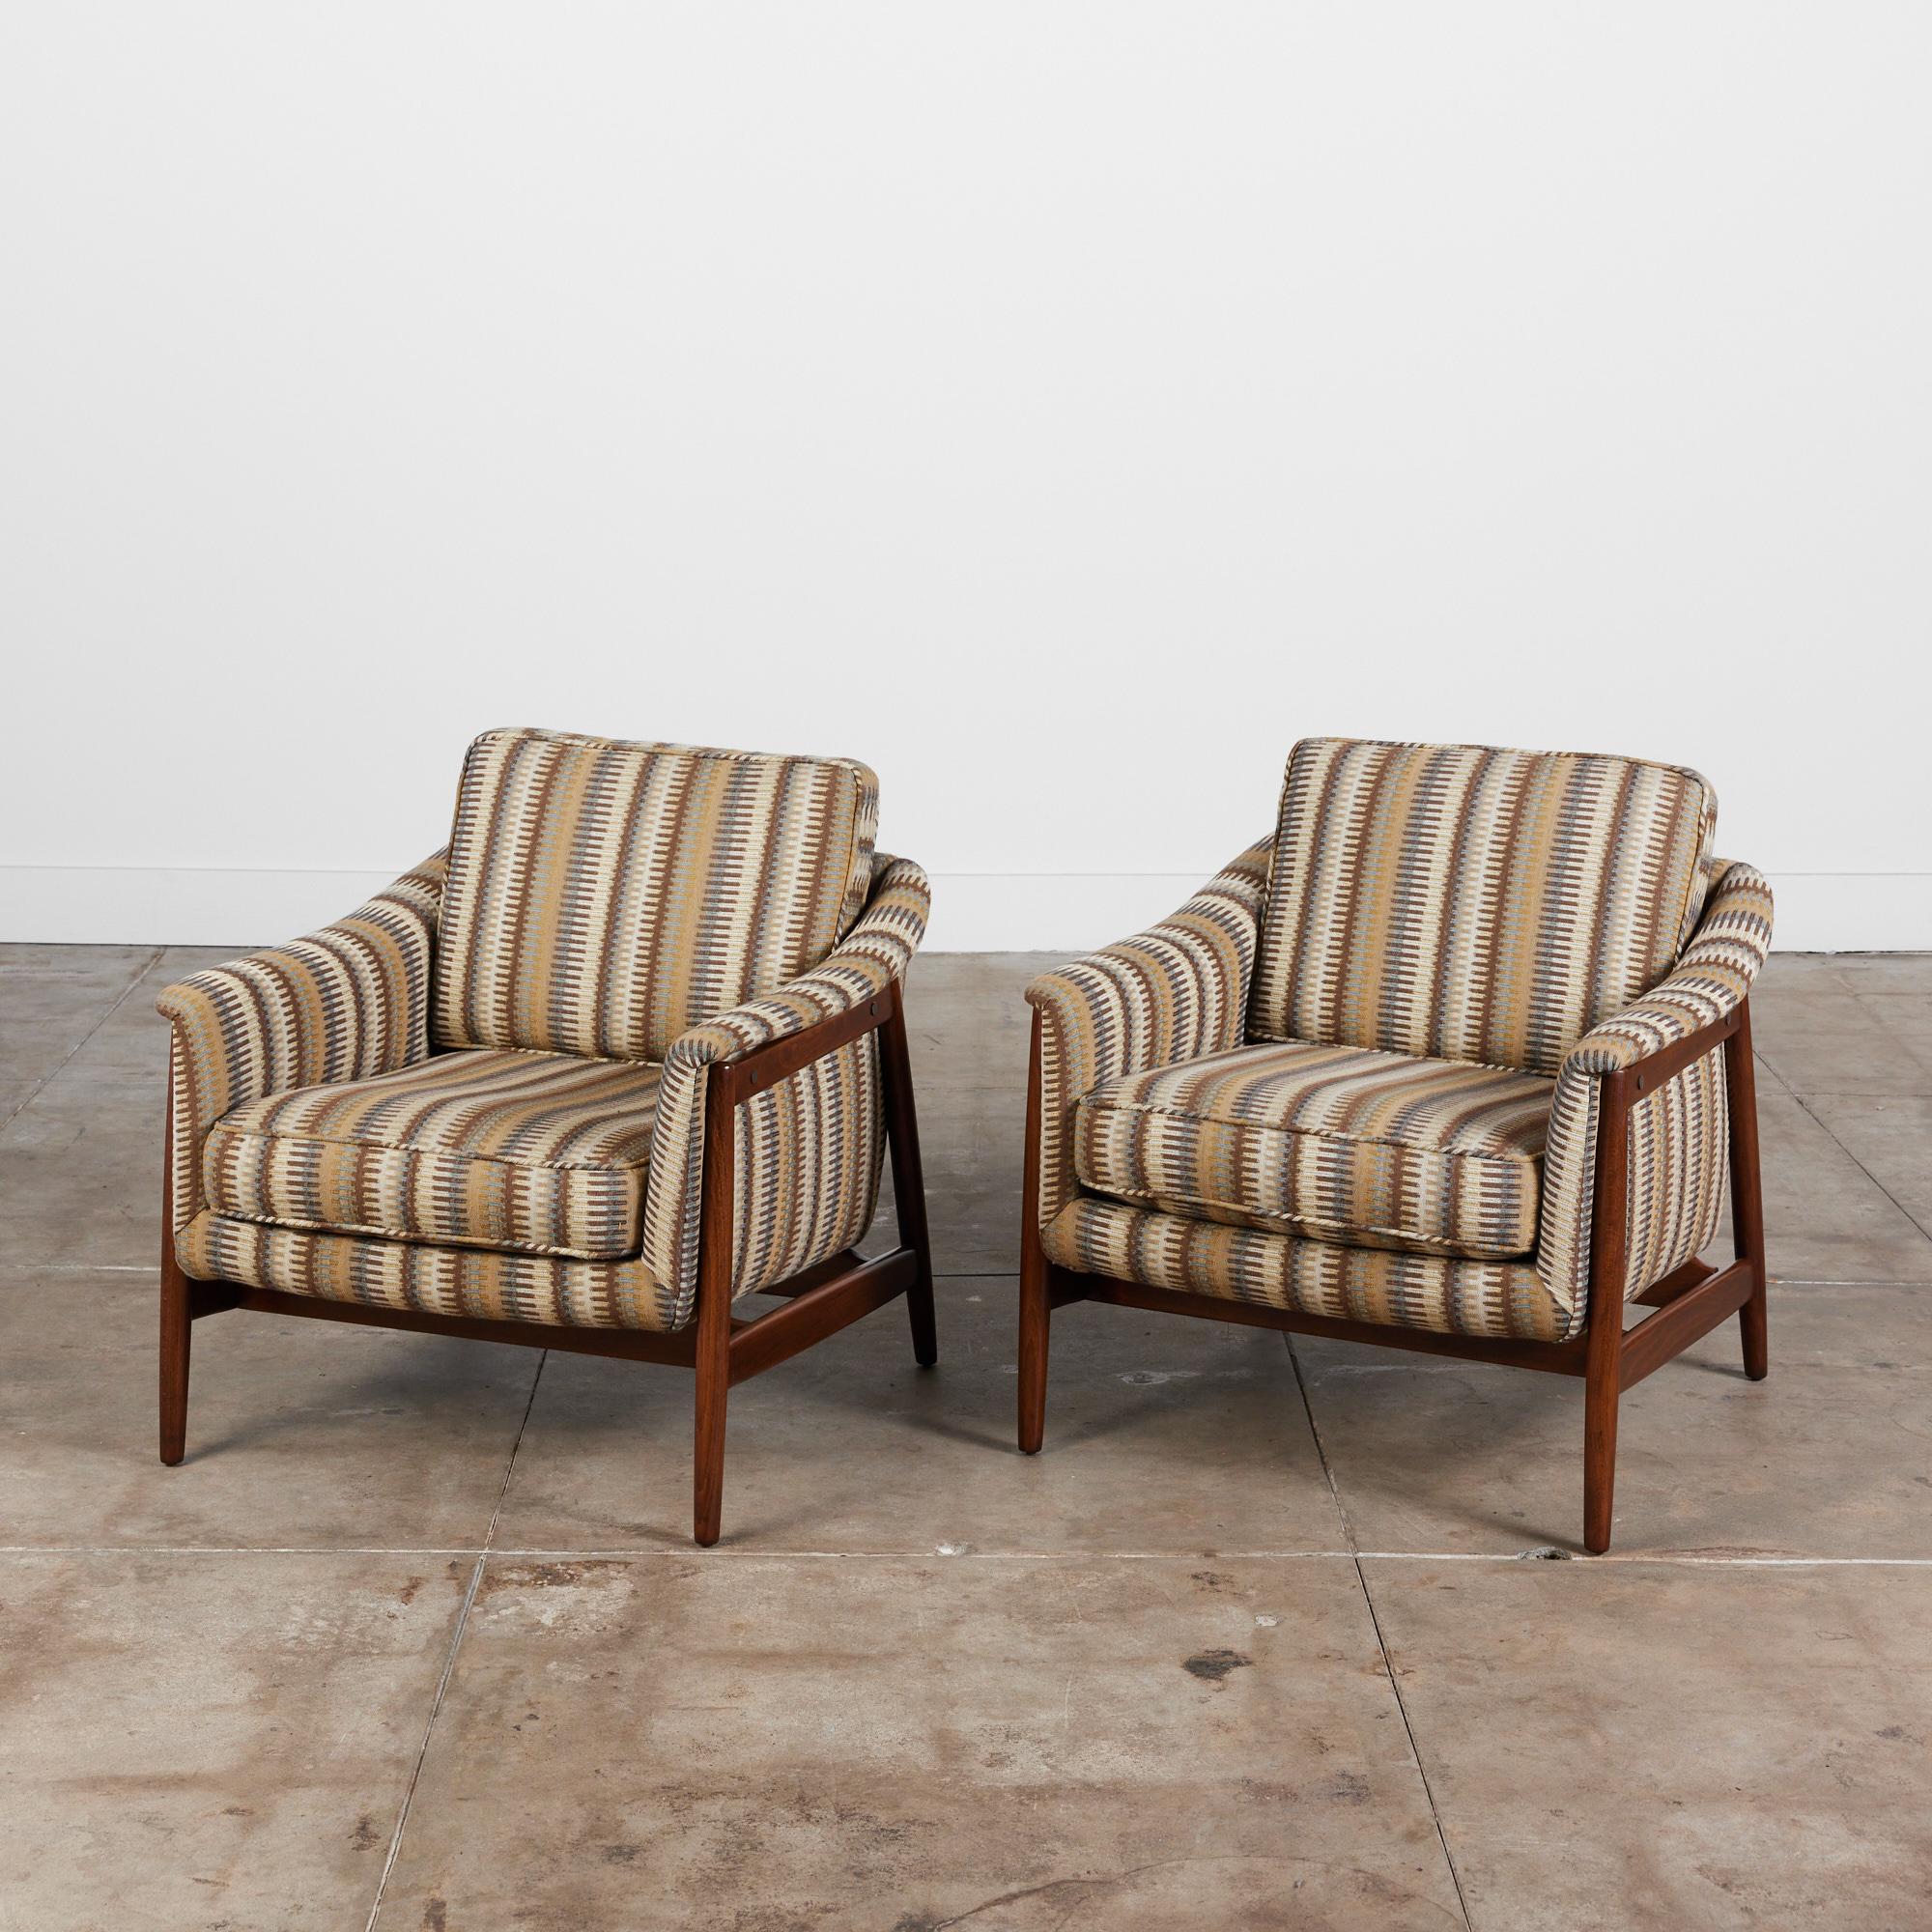 Pair of Folke Ohlsson designed lounge chairs for Dux, circa 1950s, Sweden. The chairs feature solid birch bases and upholstered seats in a geometric striped earth tone fabric.

Dimensions:
29